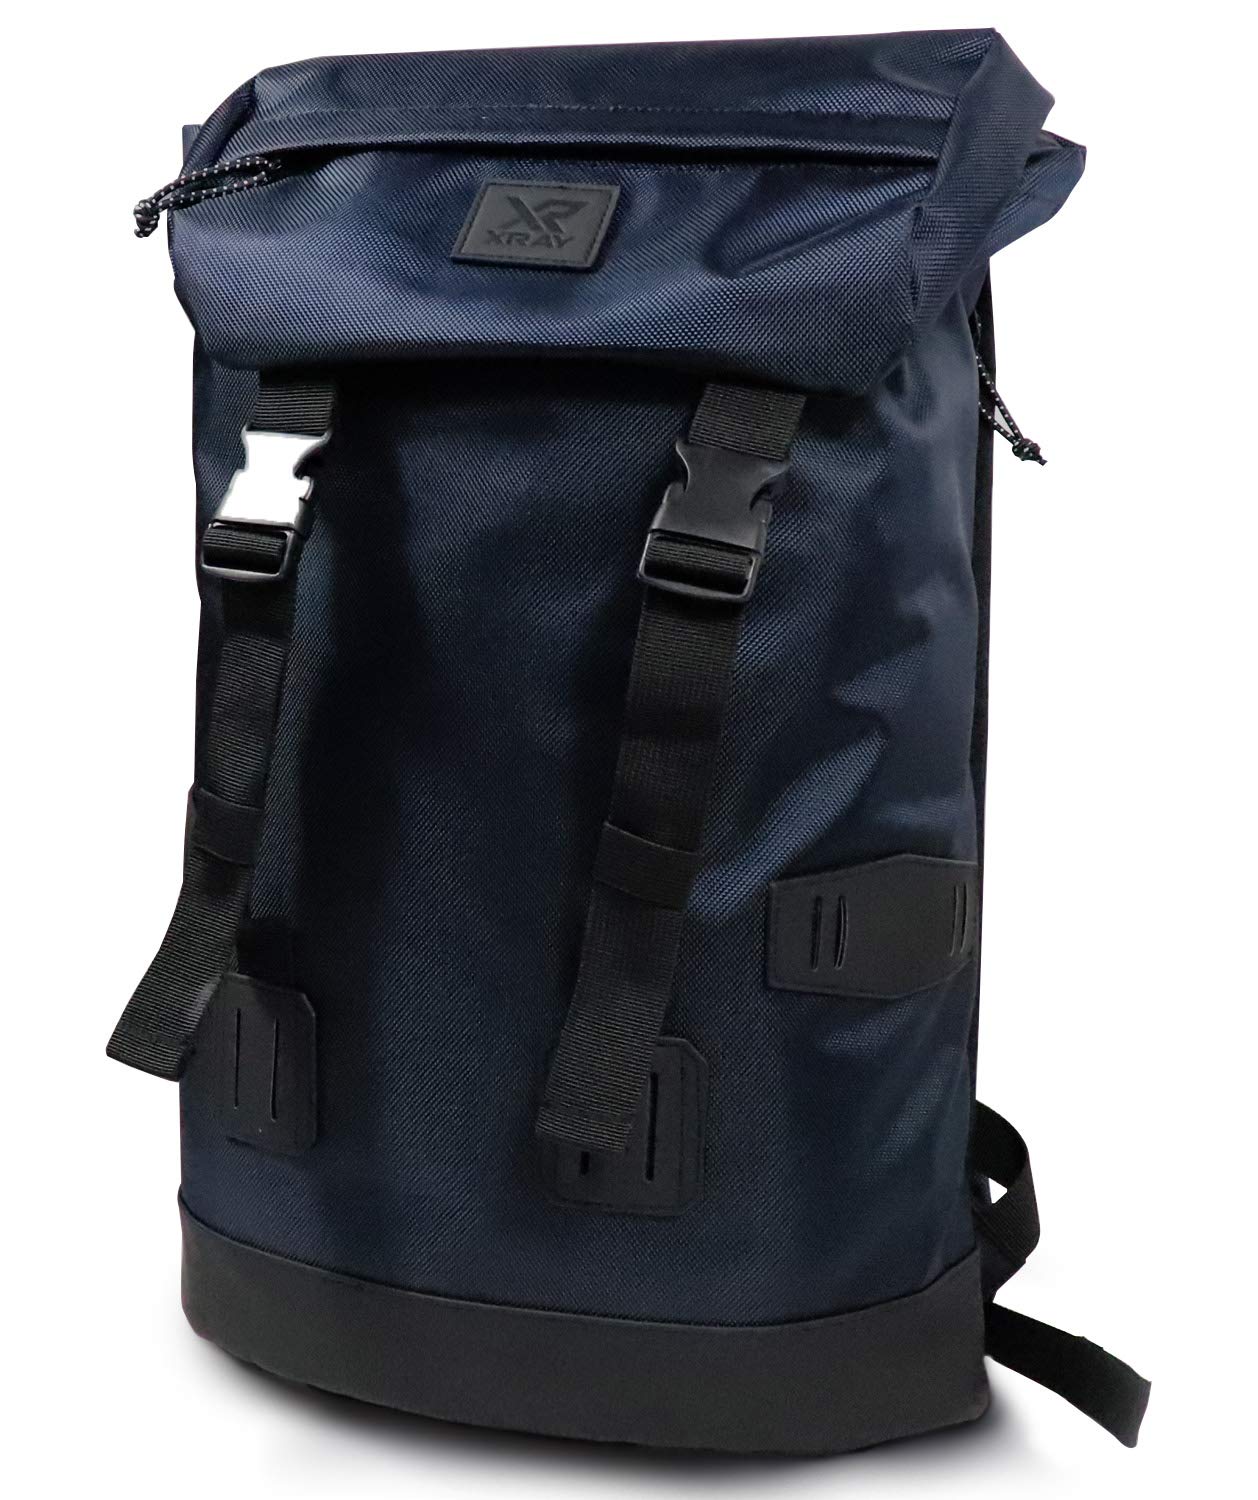 X RAY Backpack Canvas Retro Rucksack Travel Hiking Mountain Overnight Weekend Bag for Men and Women, One Size, Navy/Black